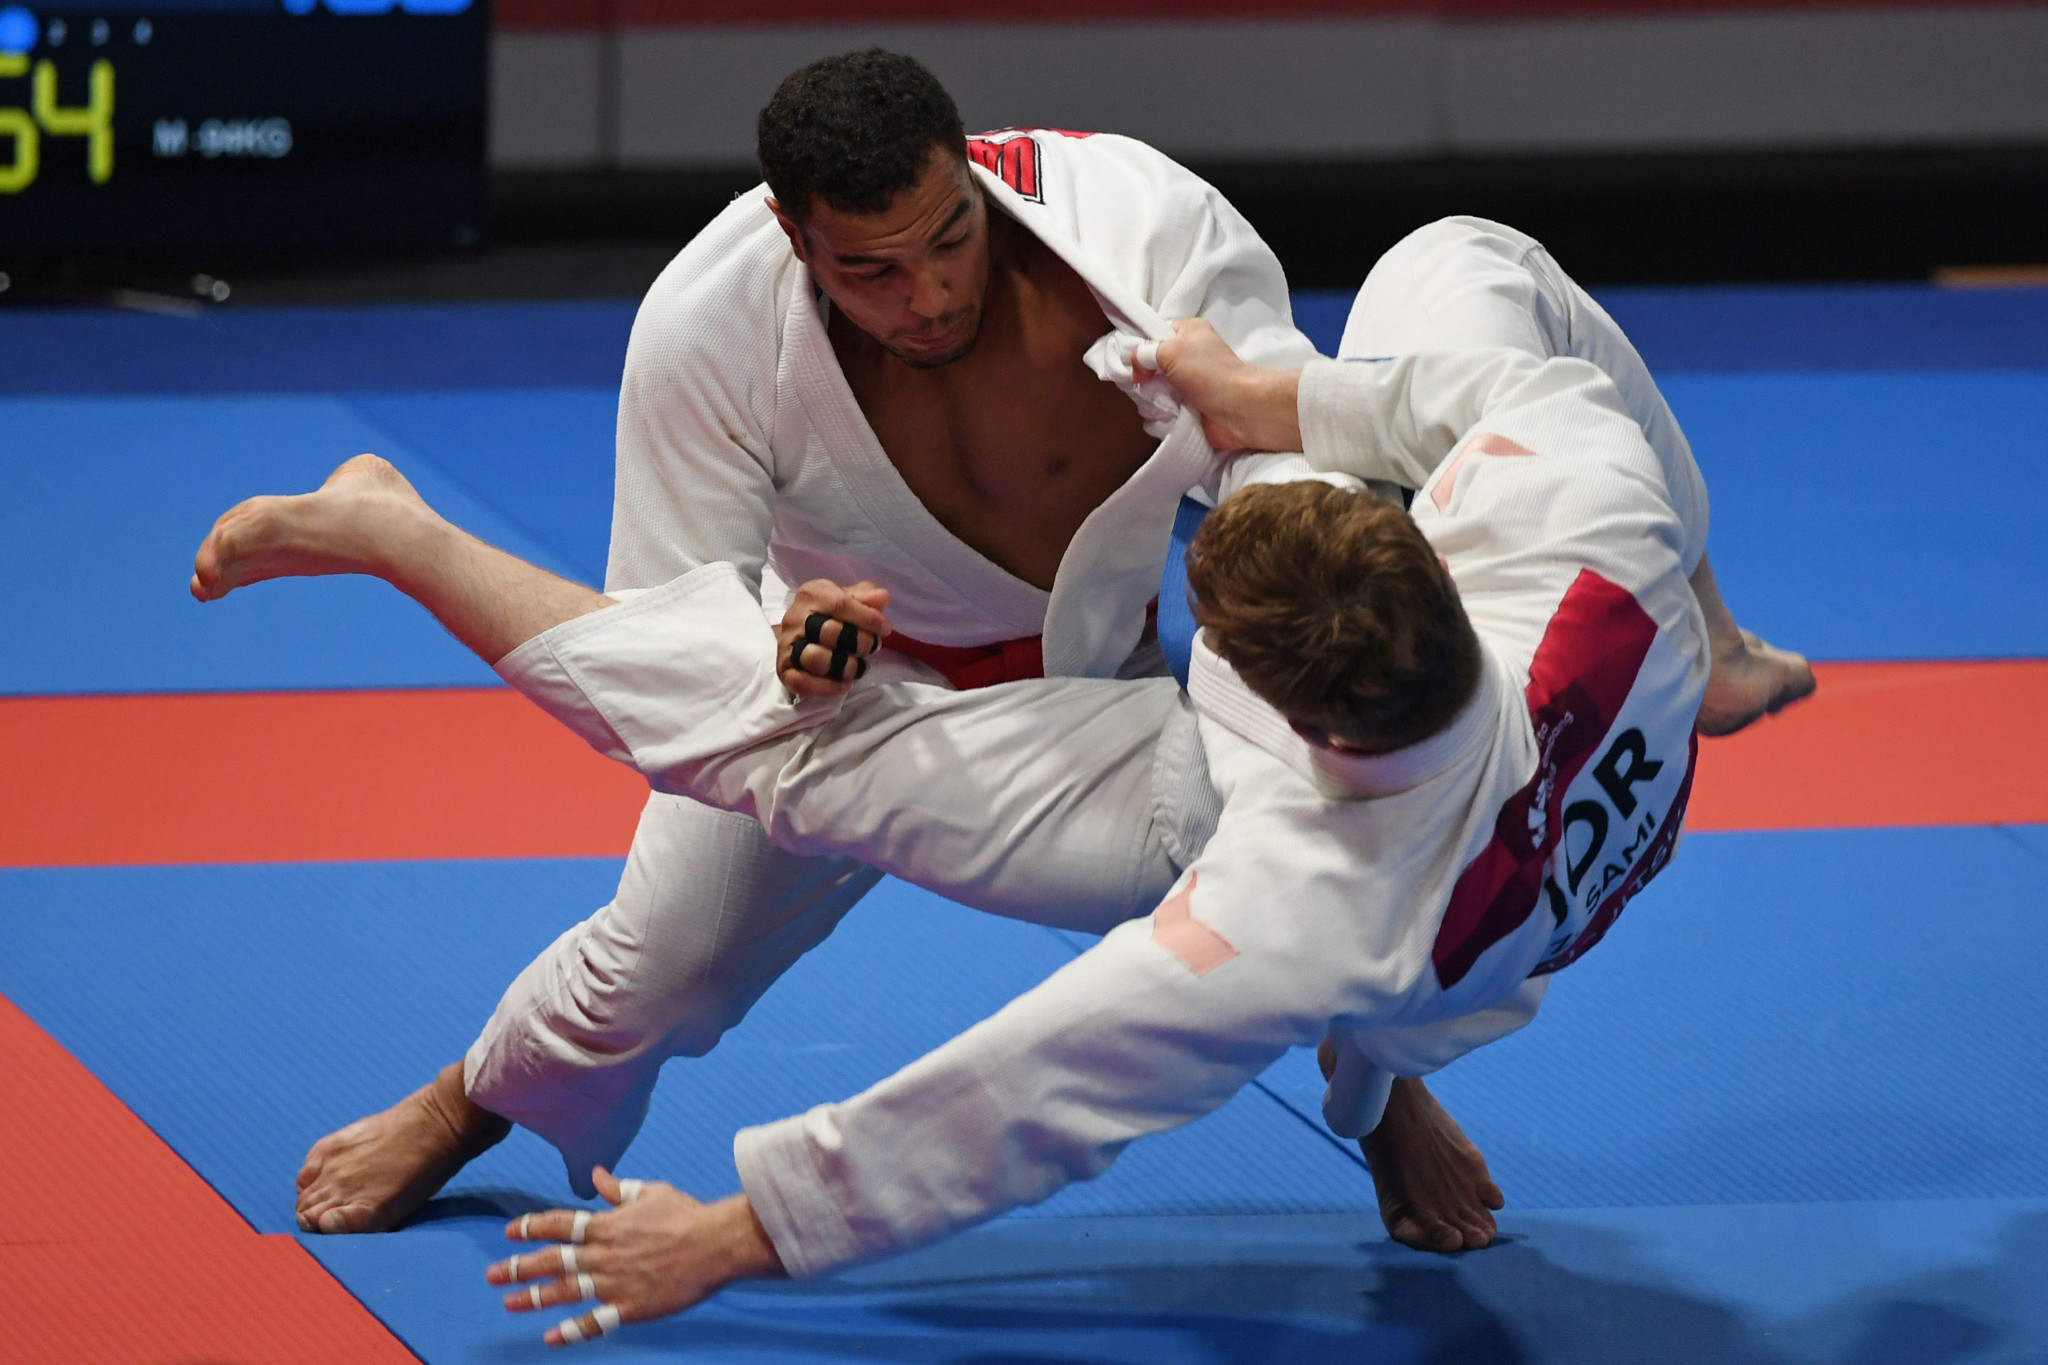 Ju-jitsu debuted at the Asian Games at the 2018 edition in Jakarta ©Getty Images